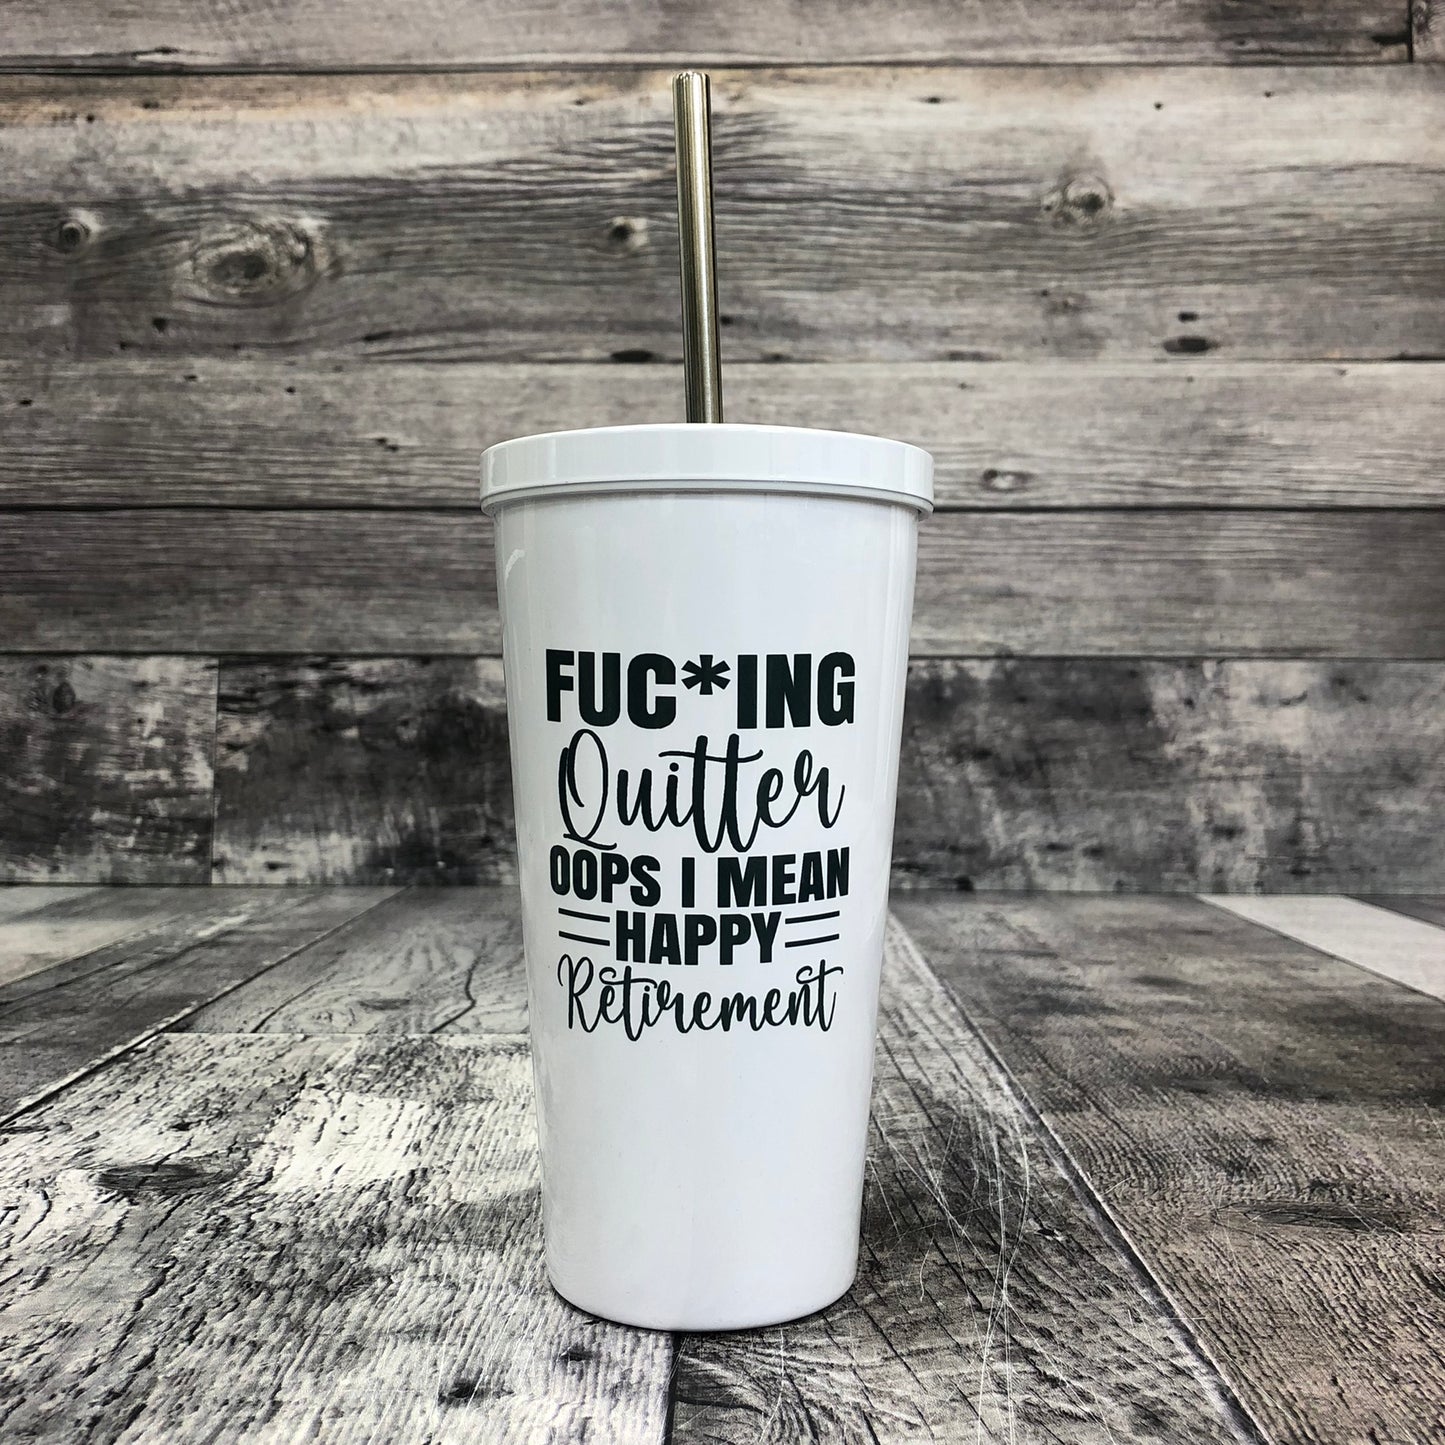 Fuc*ing Quitter Oops I Mean Happy Retirement - Straw Mug